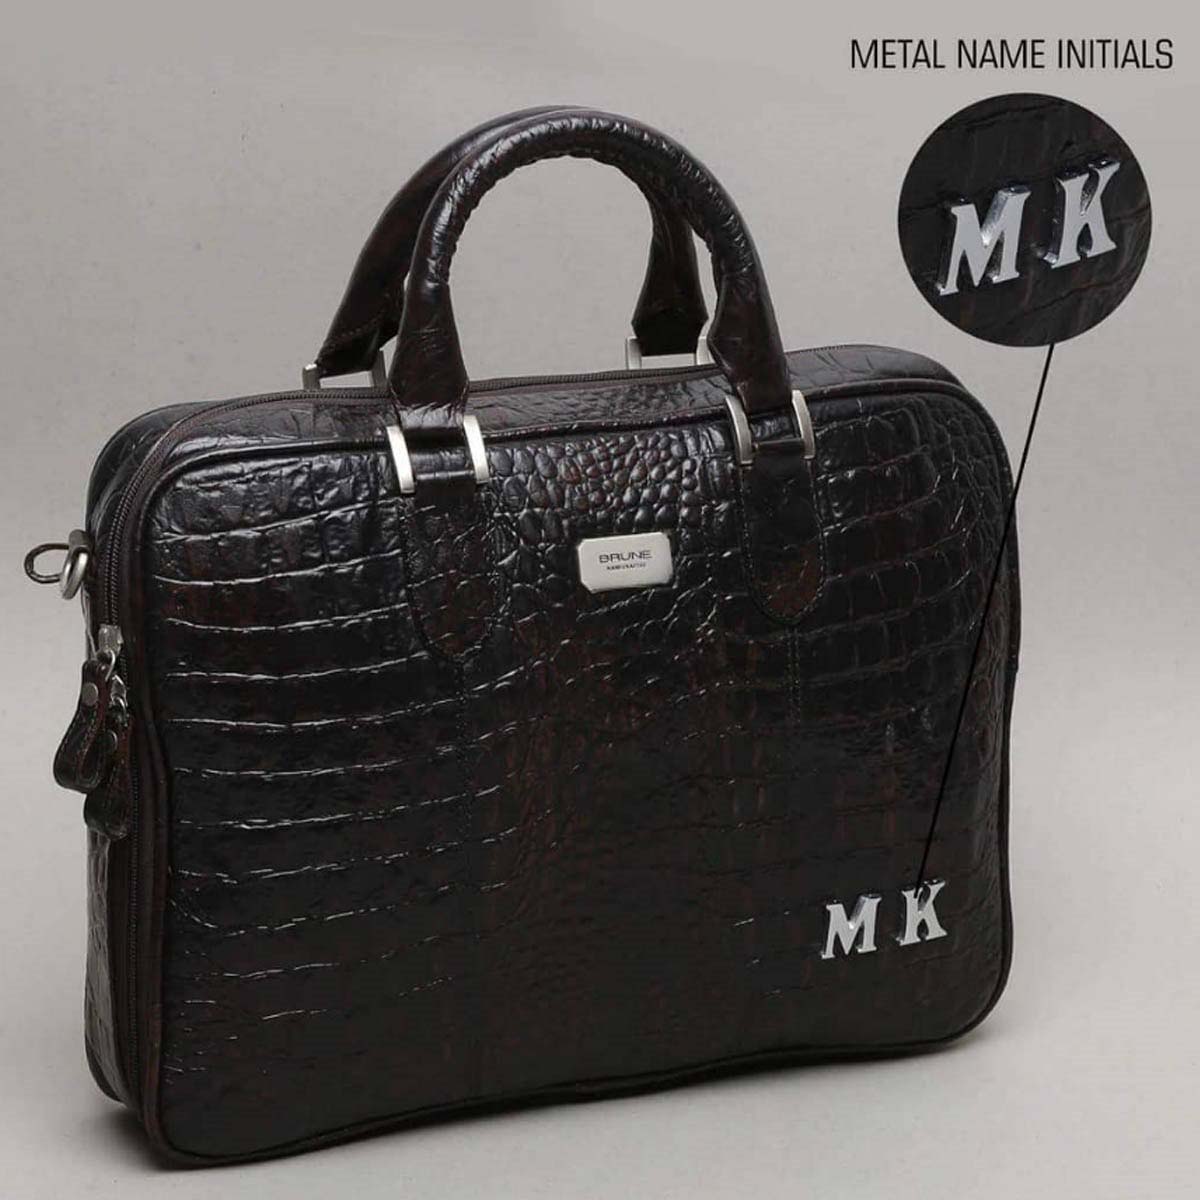 Black Croco Leather Customized Laptop Briefcase With MK Initials By Brune & Bareskin